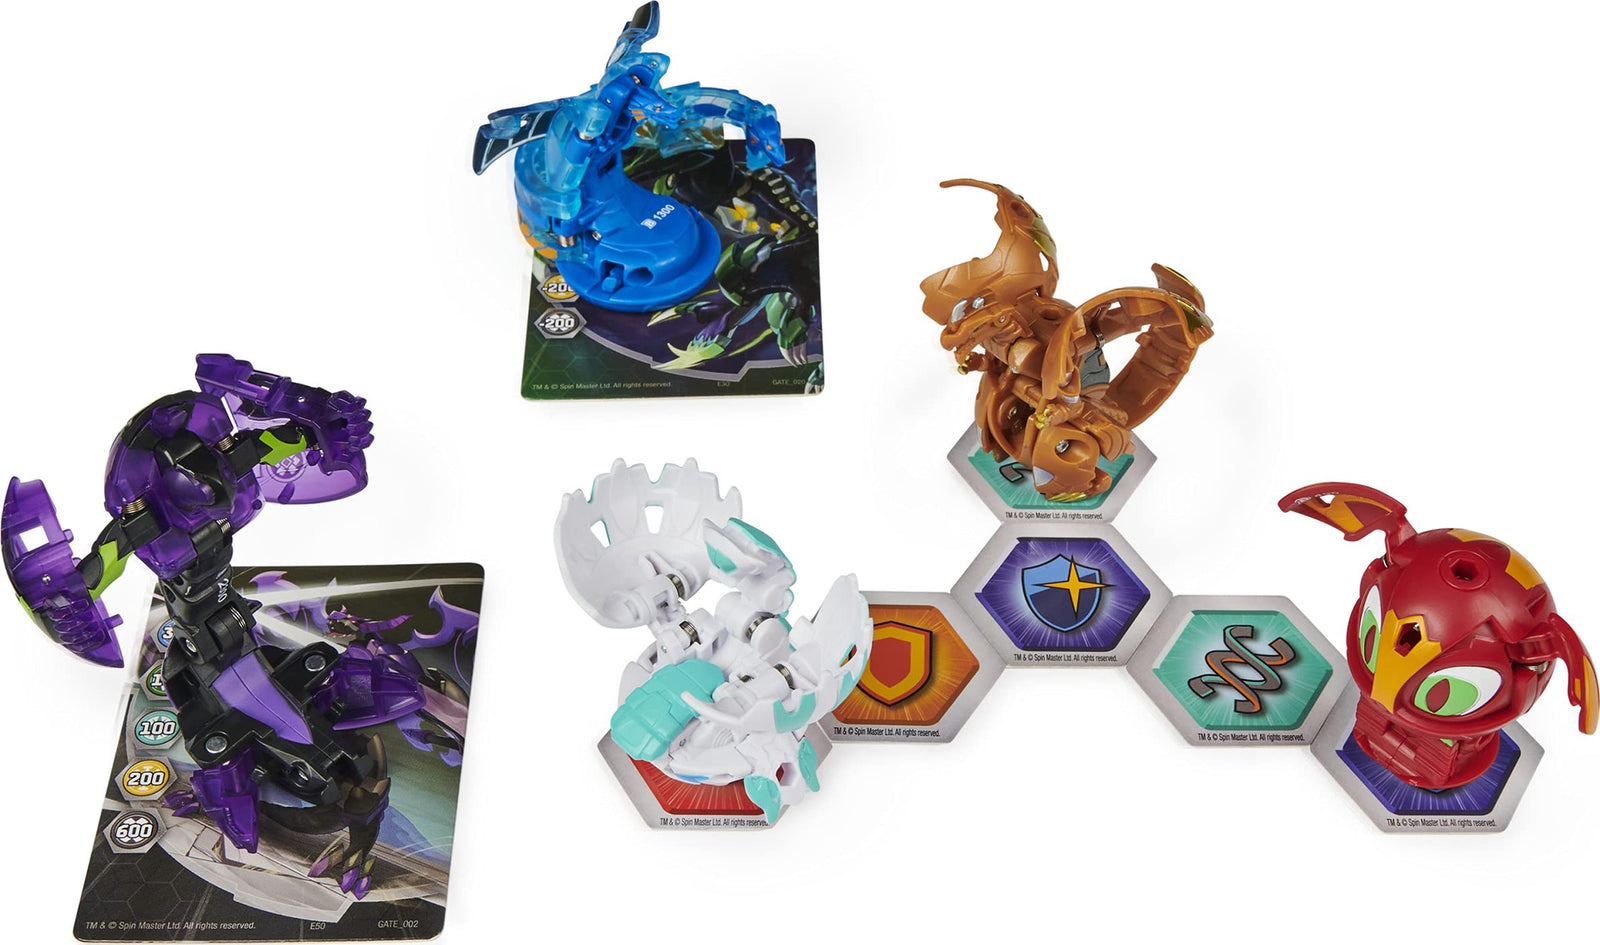 Bakugan Geogan Brawler 5-Pack, Exclusive Mutasect and Viperagon Geogan and 3 Collectible Action Figures, Kids Toys for Boys